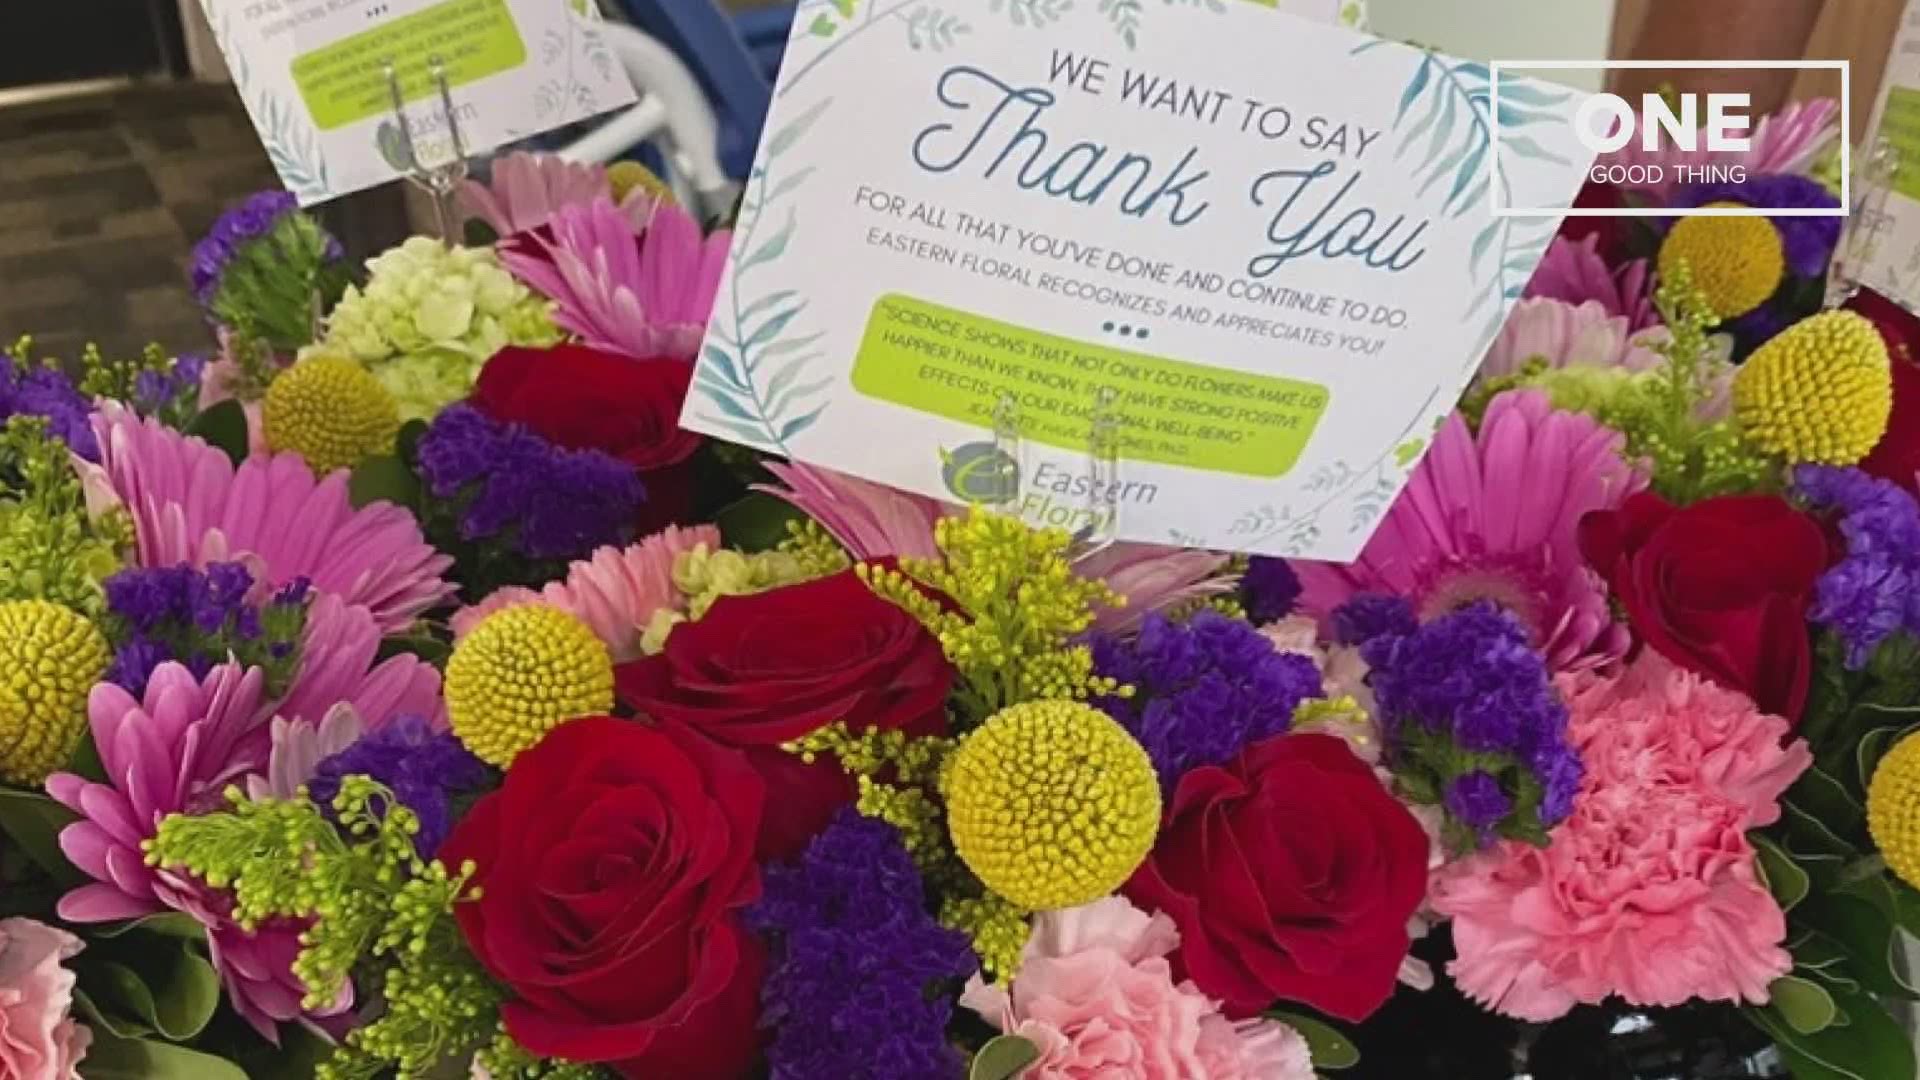 Eastern Floral has launched a campaign to deliver more than 150 floral arrangements to nurses and education professional in West Michigan.